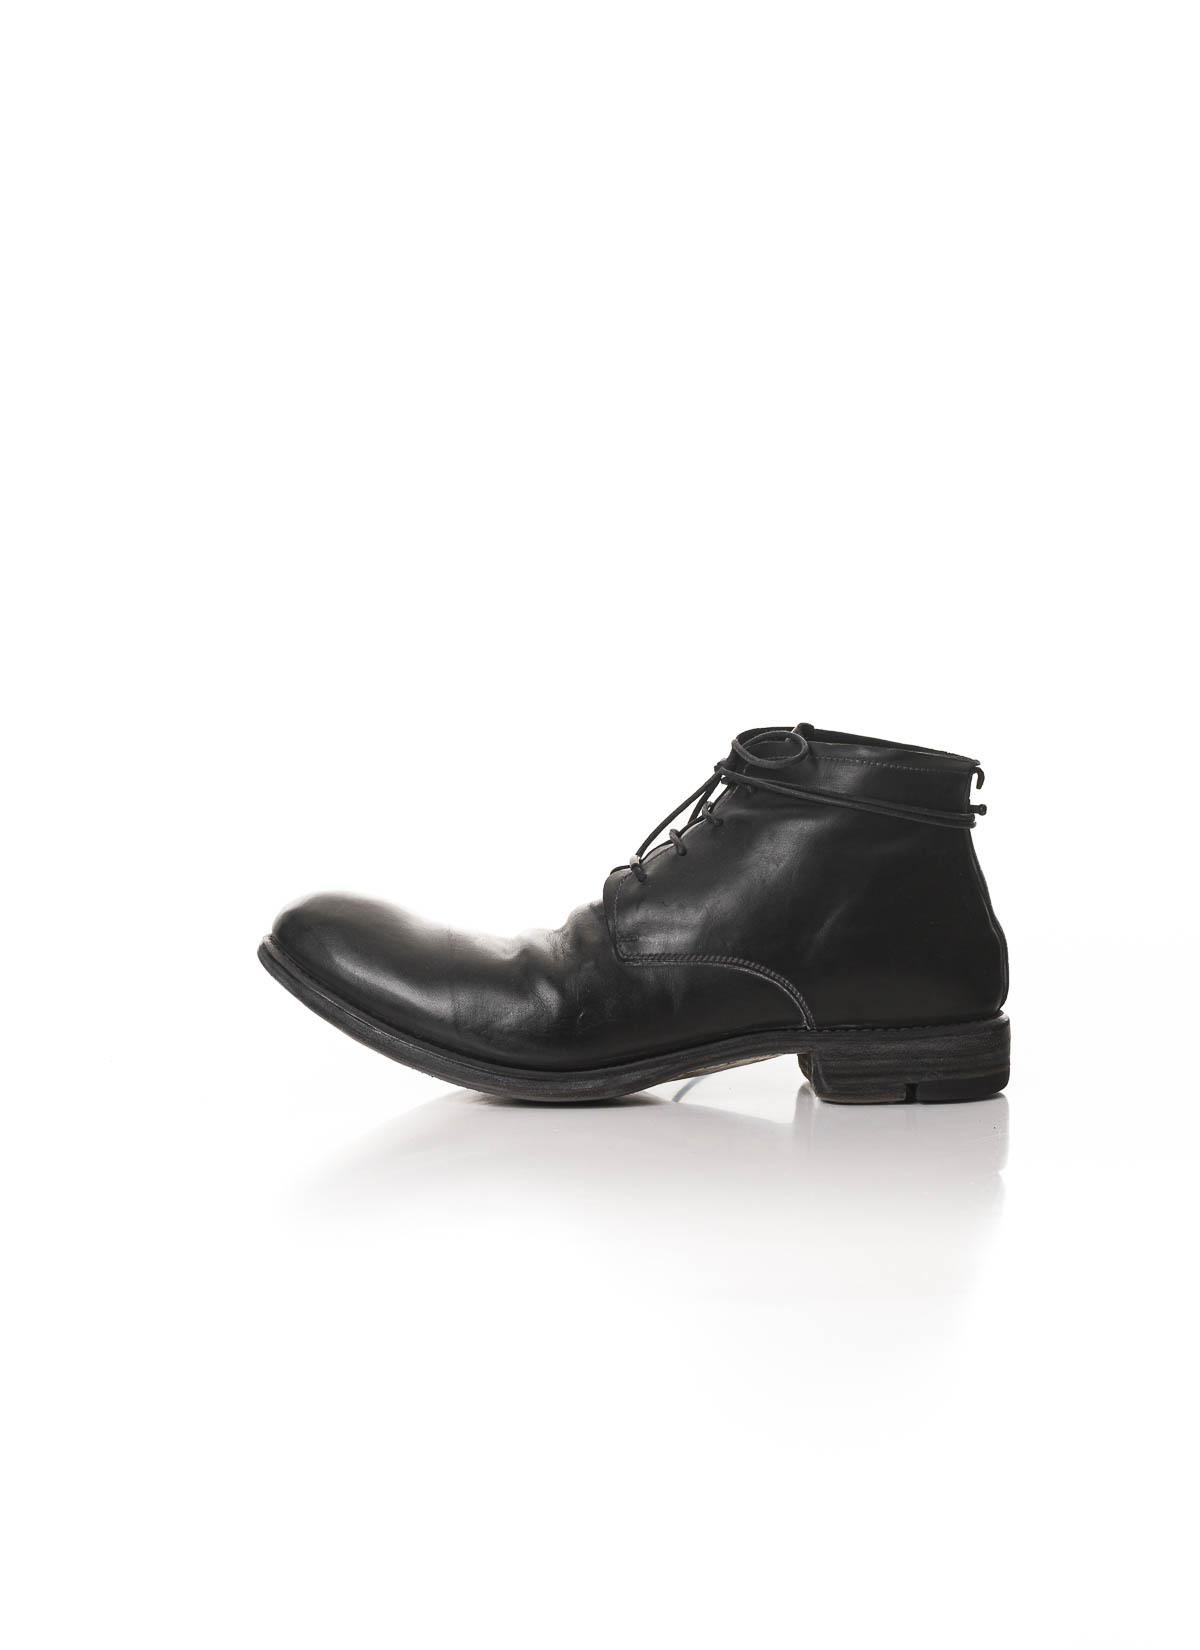 hide-m | LAYER-0 Men Classic Ankle Boot 1.5 H10, black horse leather